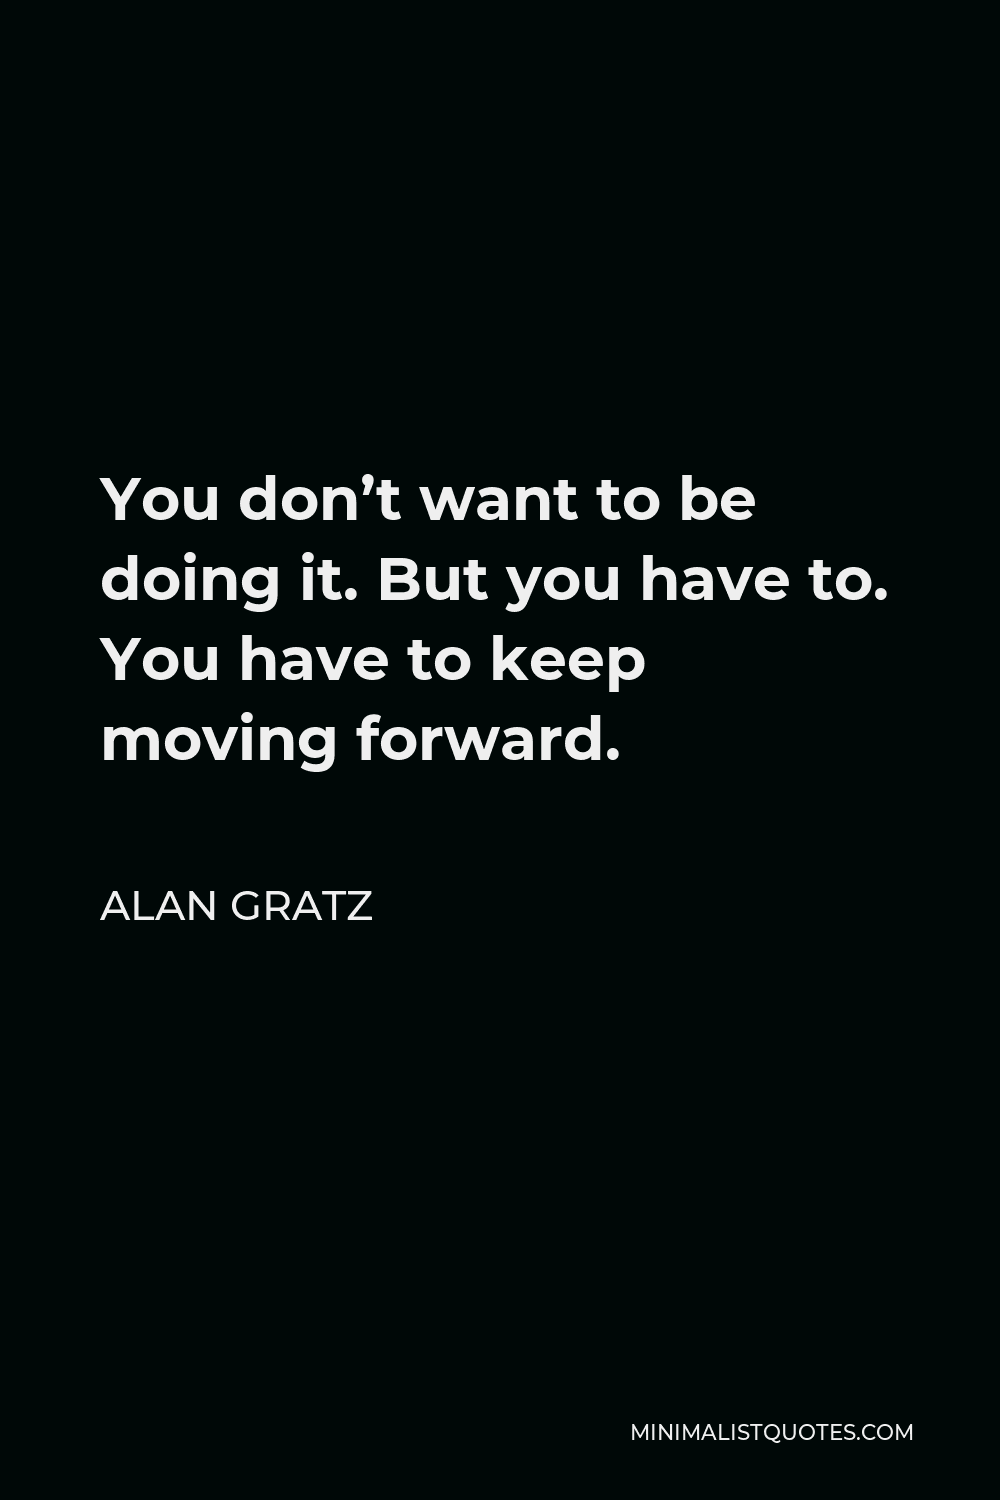 Alan Gratz Quote - You don’t want to be doing it. But you have to. You have to keep moving forward.